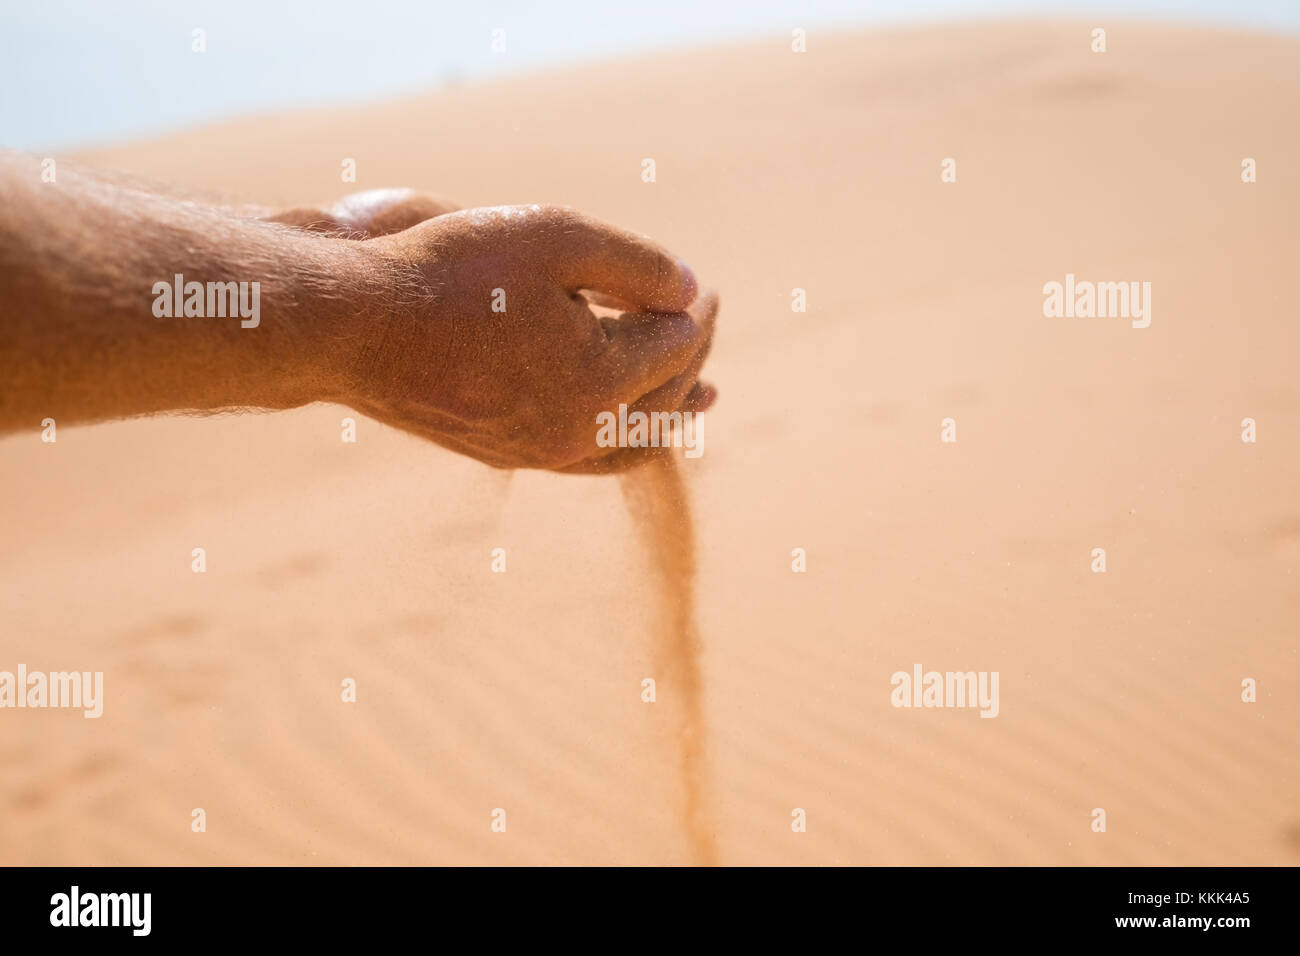 hands with falling sand in desert. Stock Photo